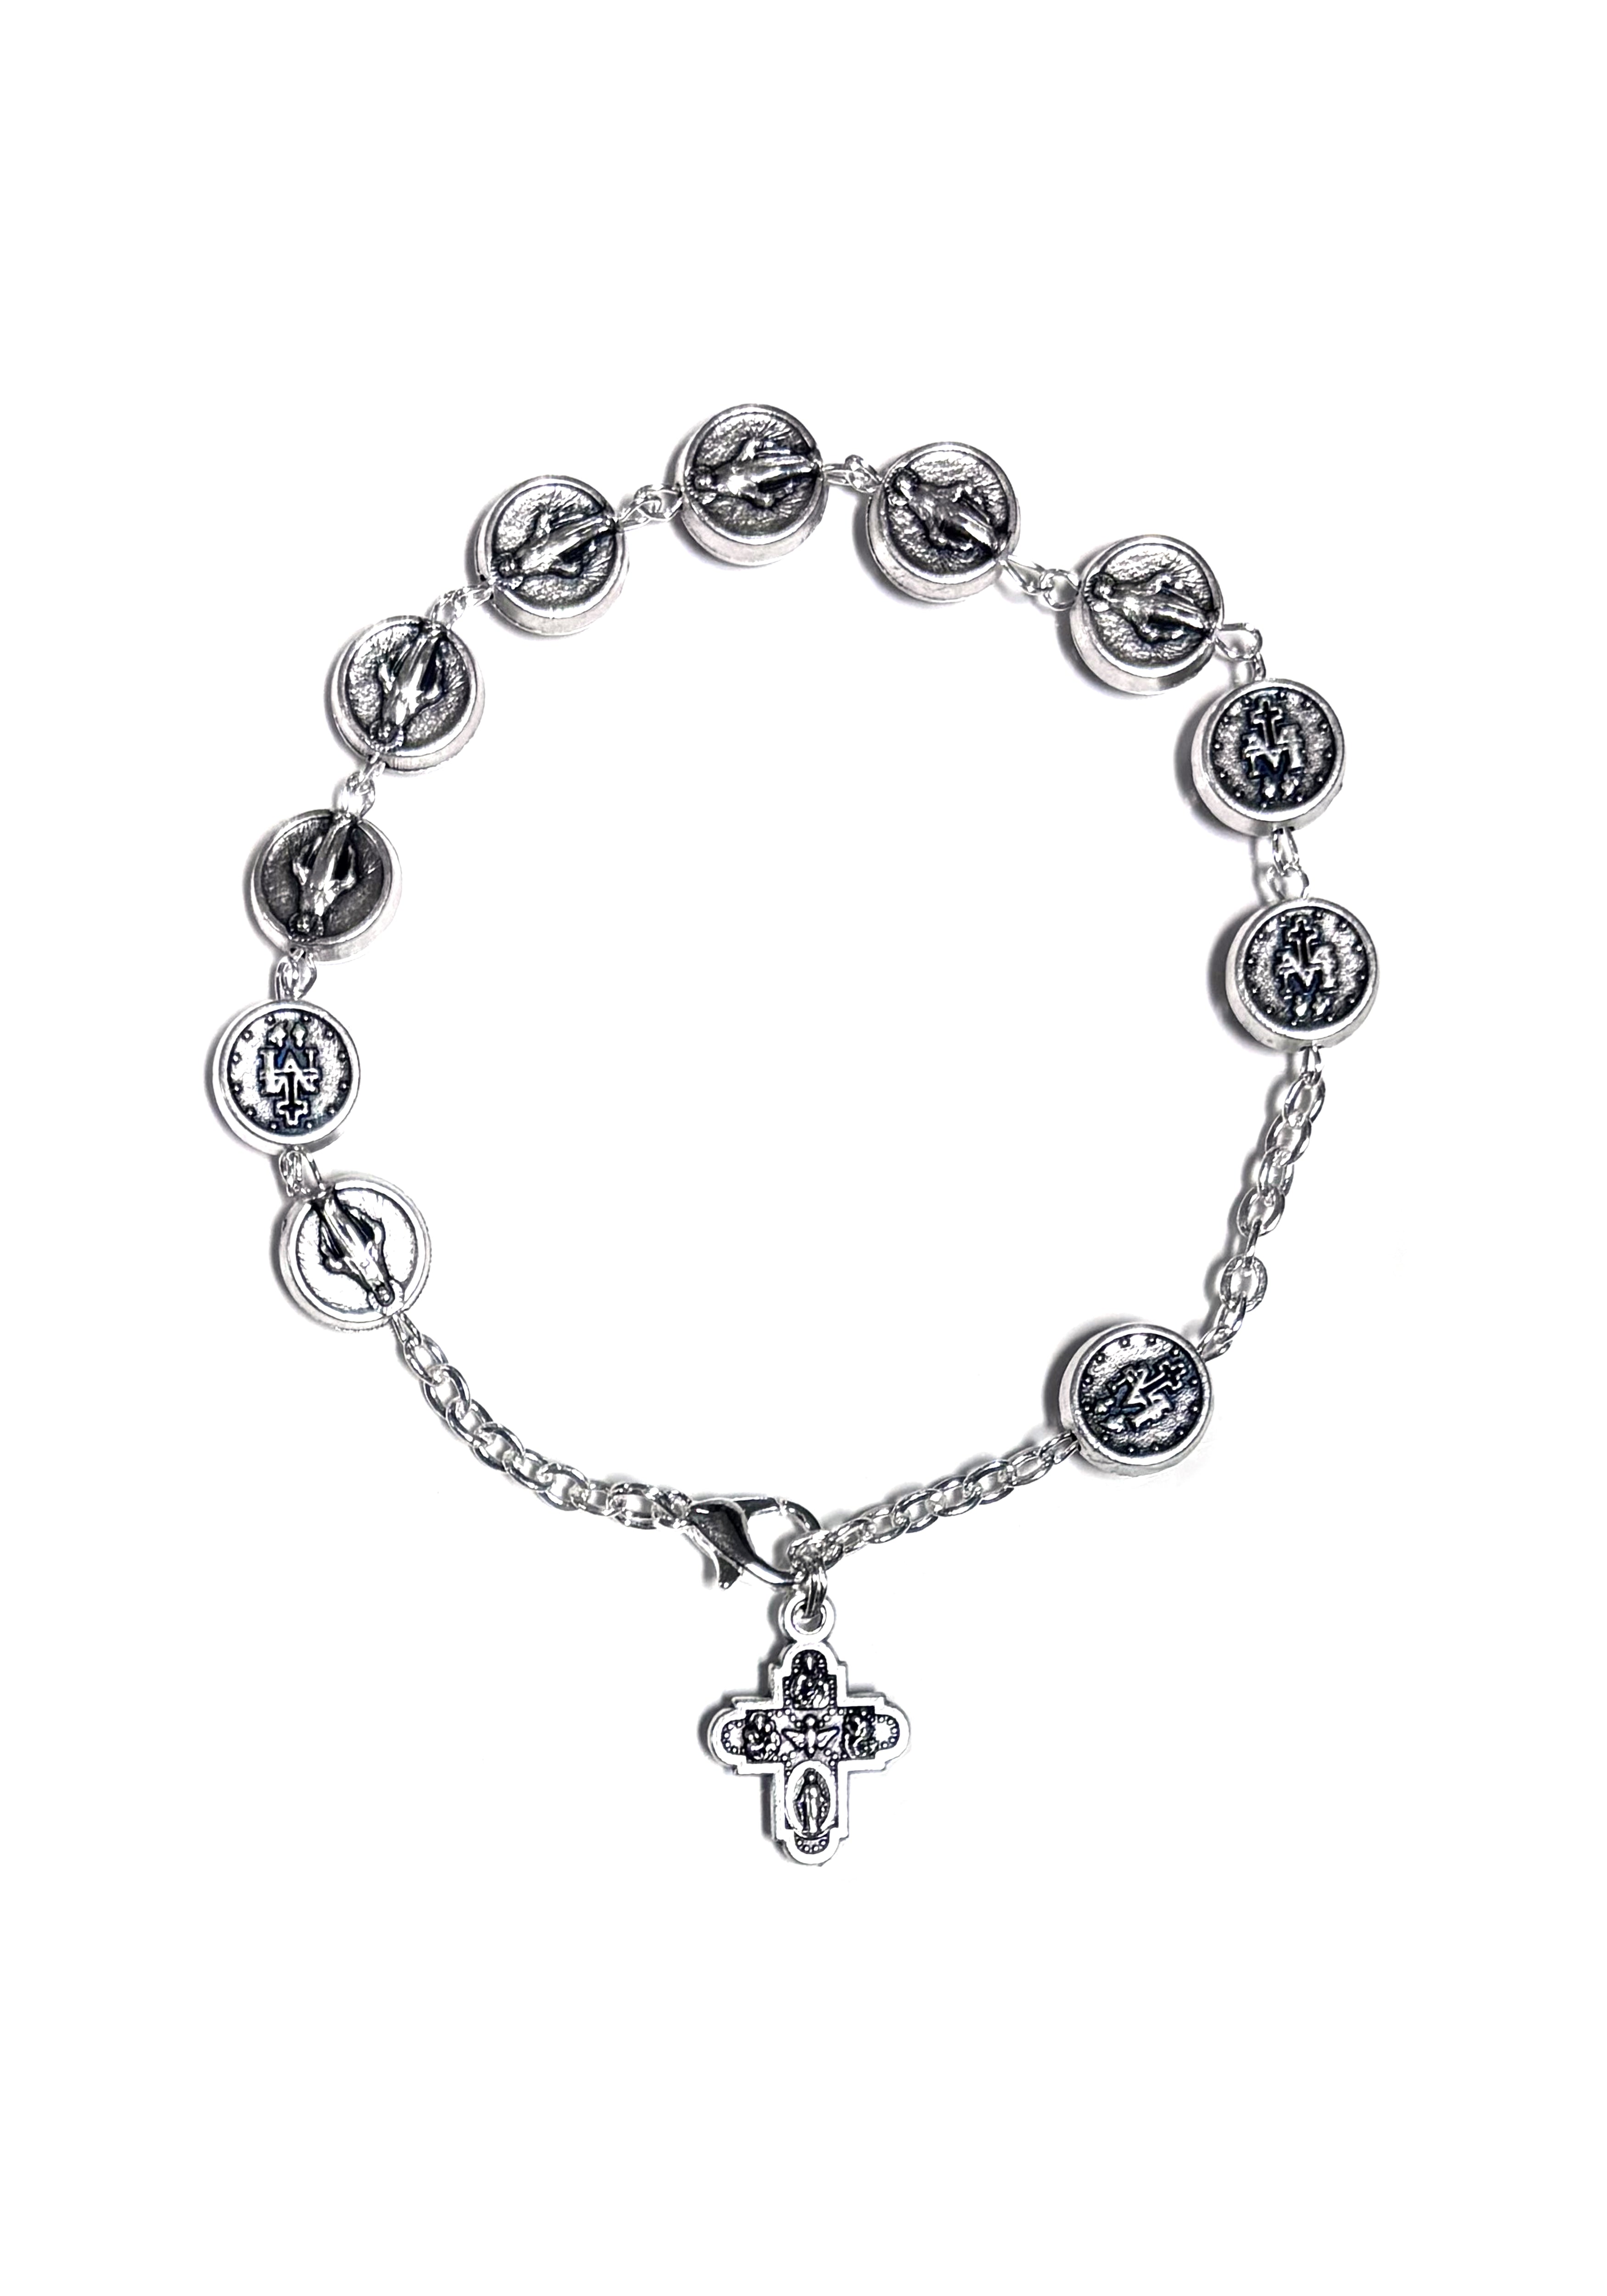 Oxidized silver bracelet with small round medals of Our Lady of Grace and Miraculous medal